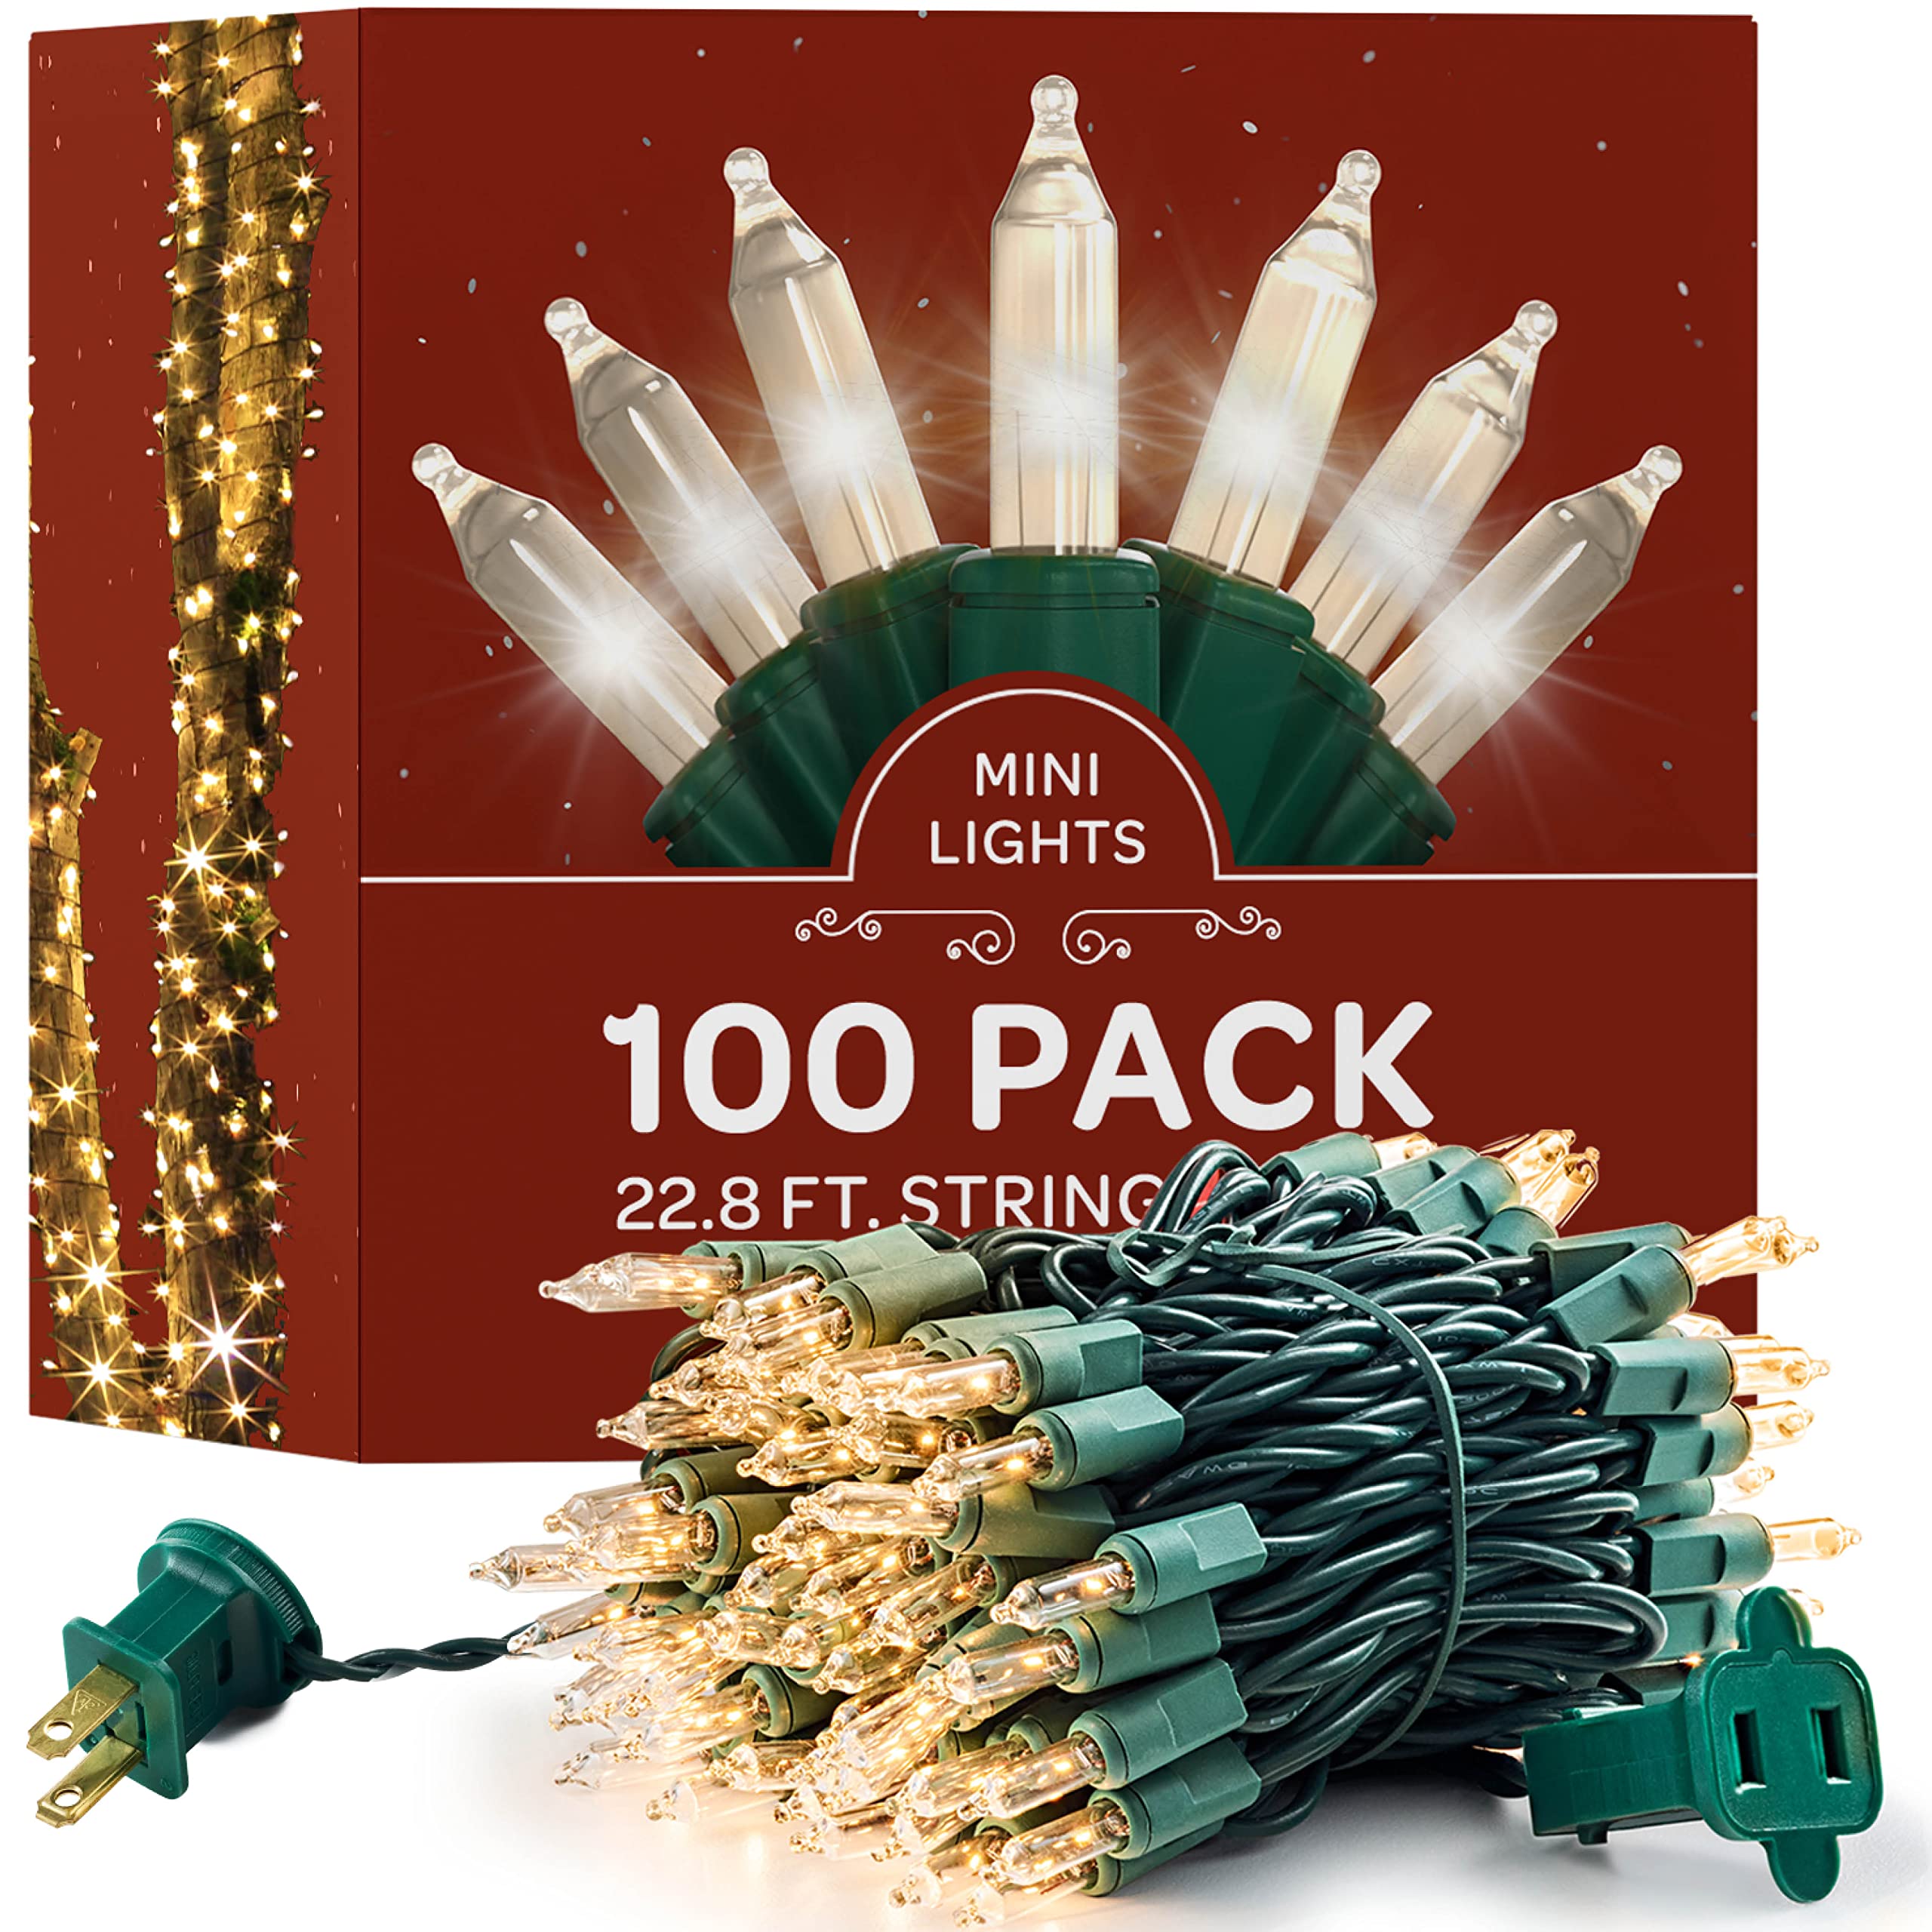 Christmas Lights [Set of 100] Warm White Christmas Lights, UL Listed for Indoor/Outdoor Use, Mini Christmas Lights, Small Christmas Lights for Holiday/Party Festival Decorations 22.8 Ft (Green Wire)  - Very Good